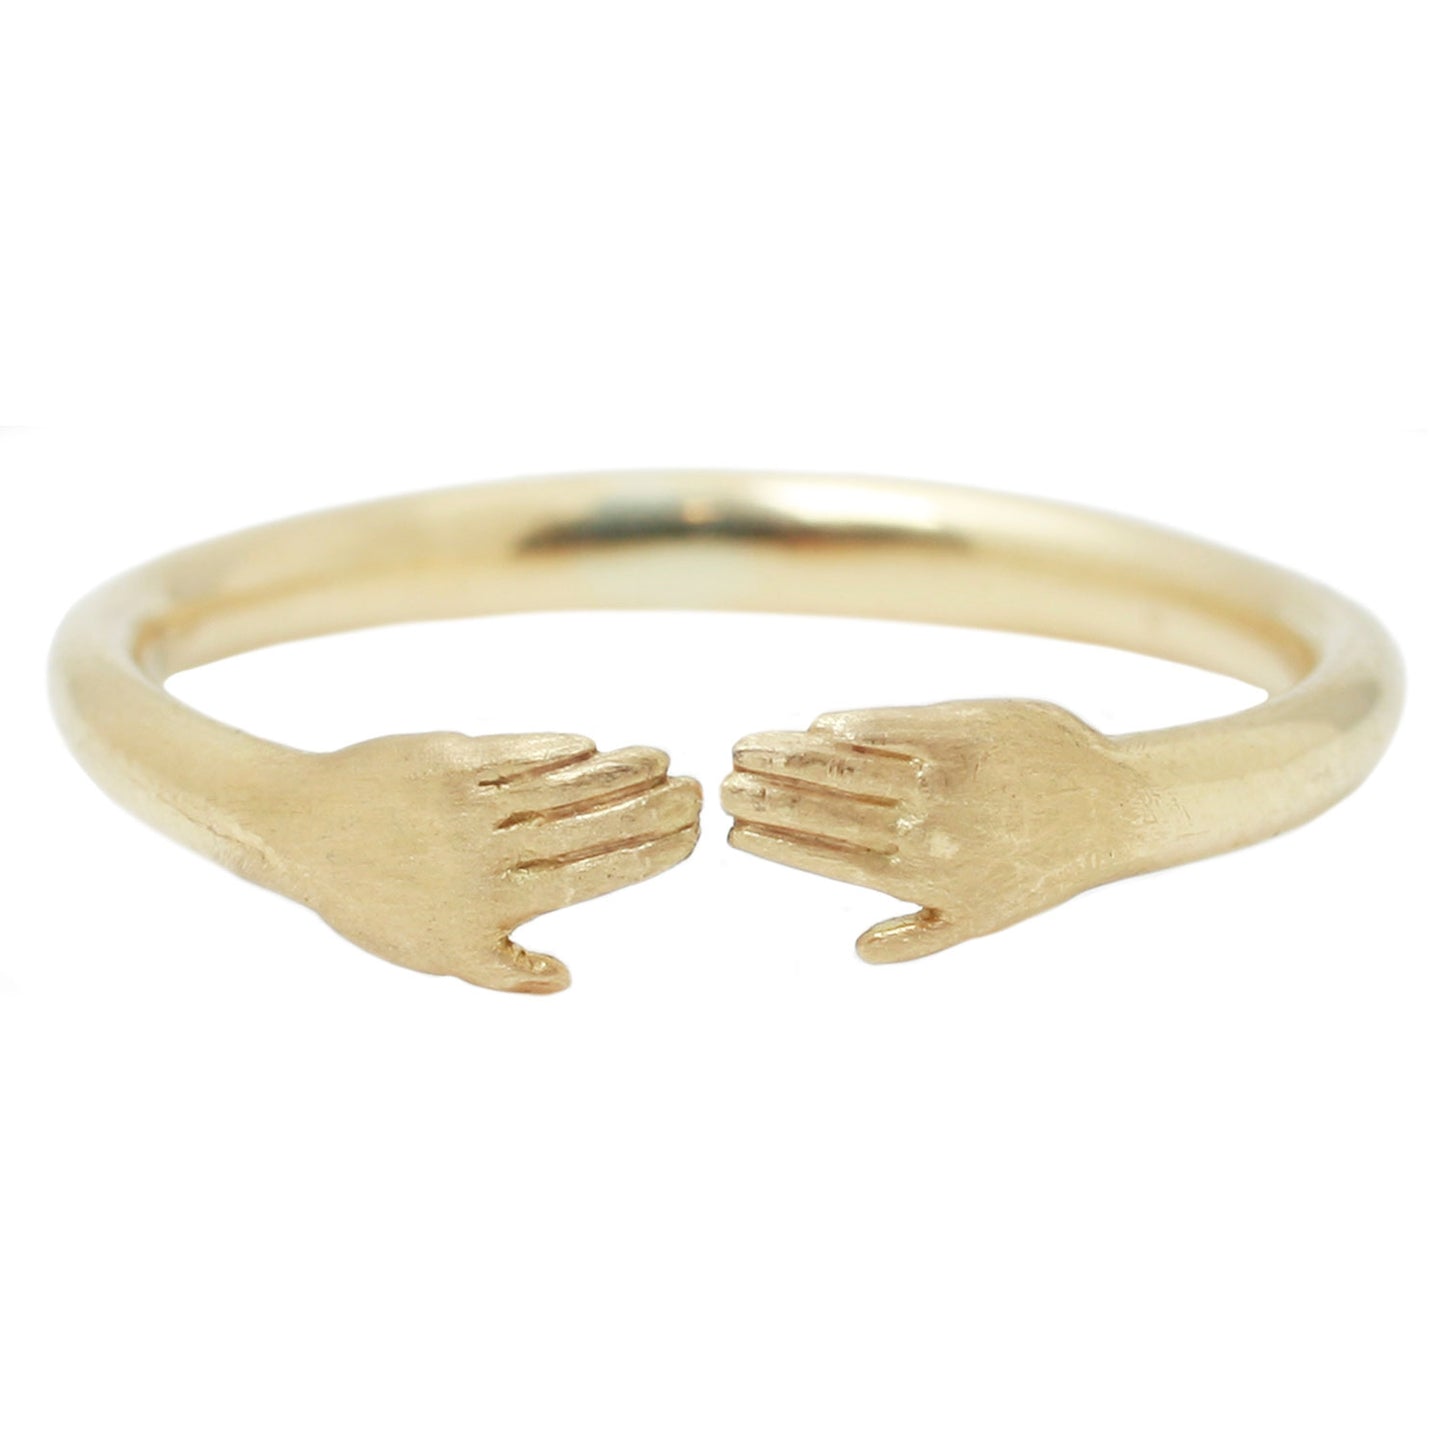 Tiny Hands Ring – Anthony Lent